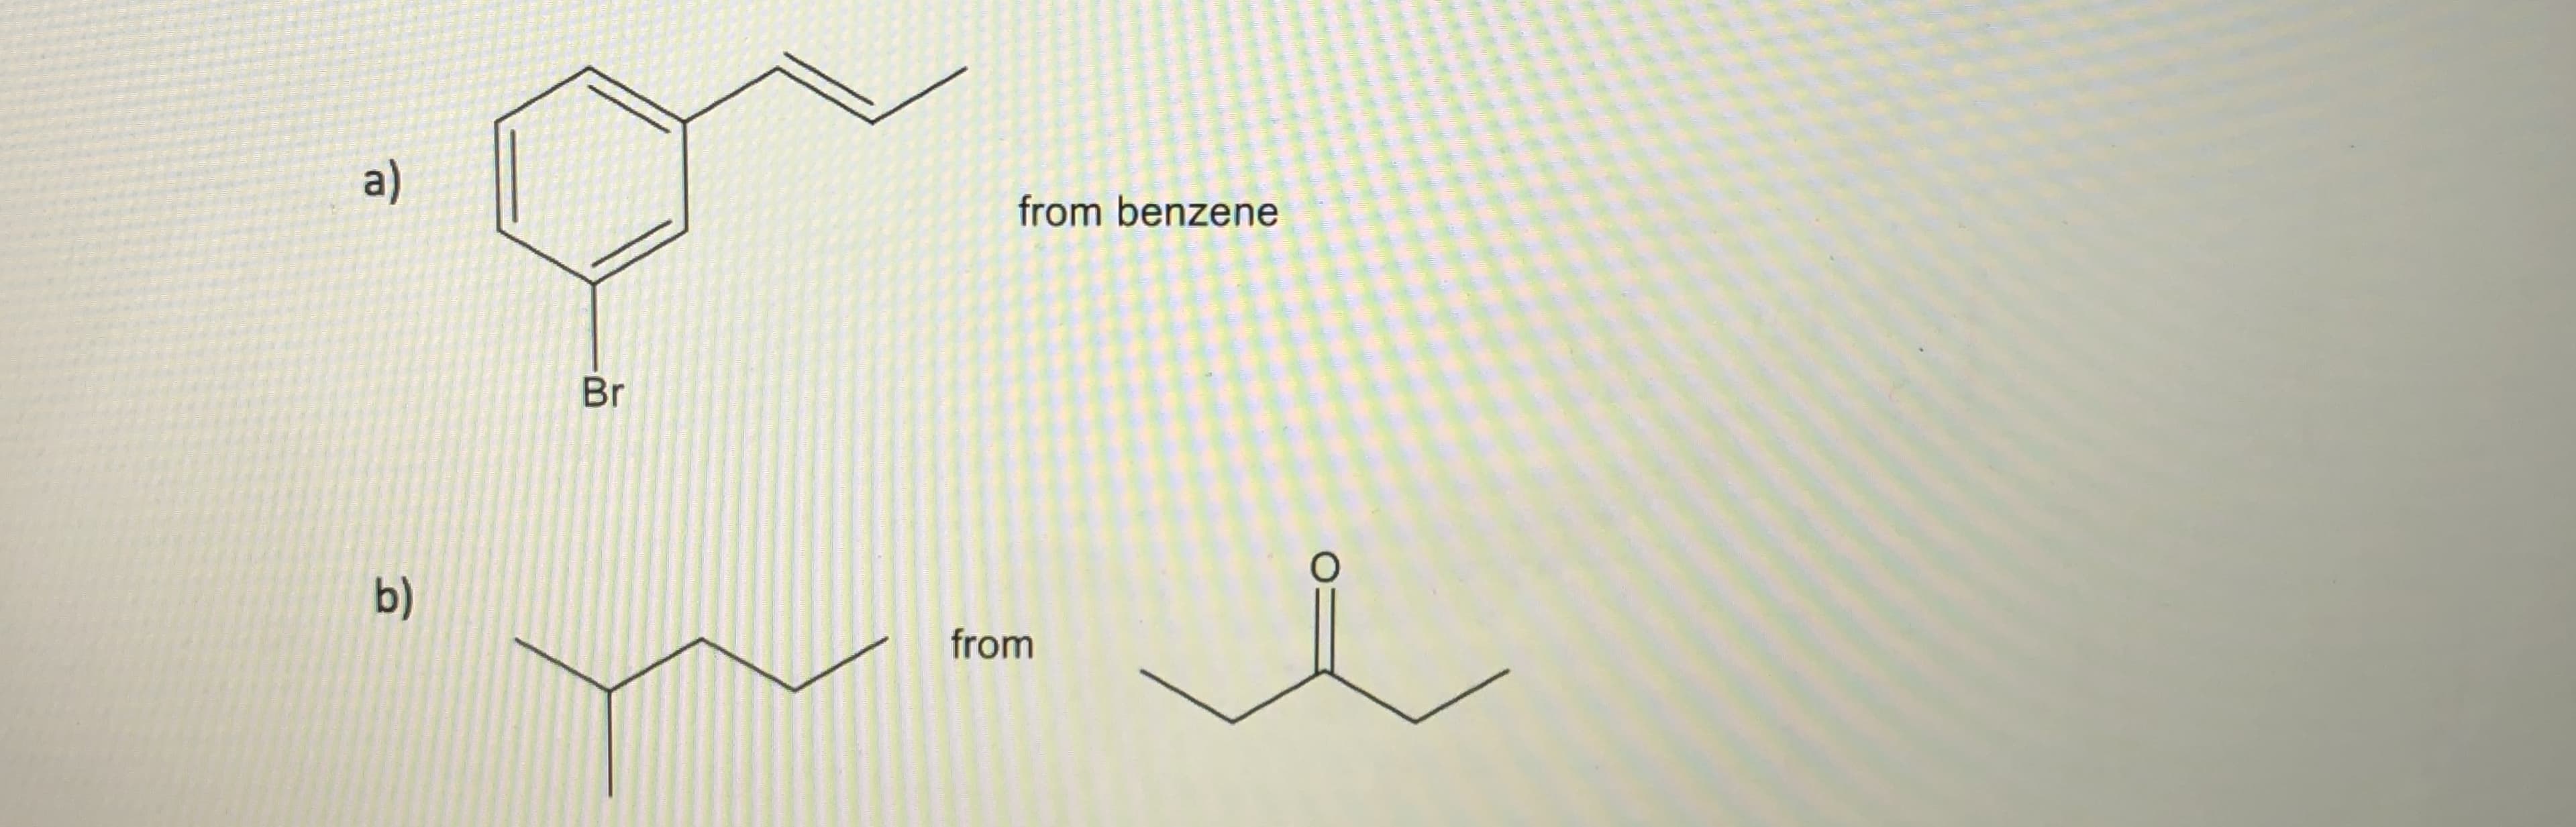 a)
from benzene
Br
b)
from
